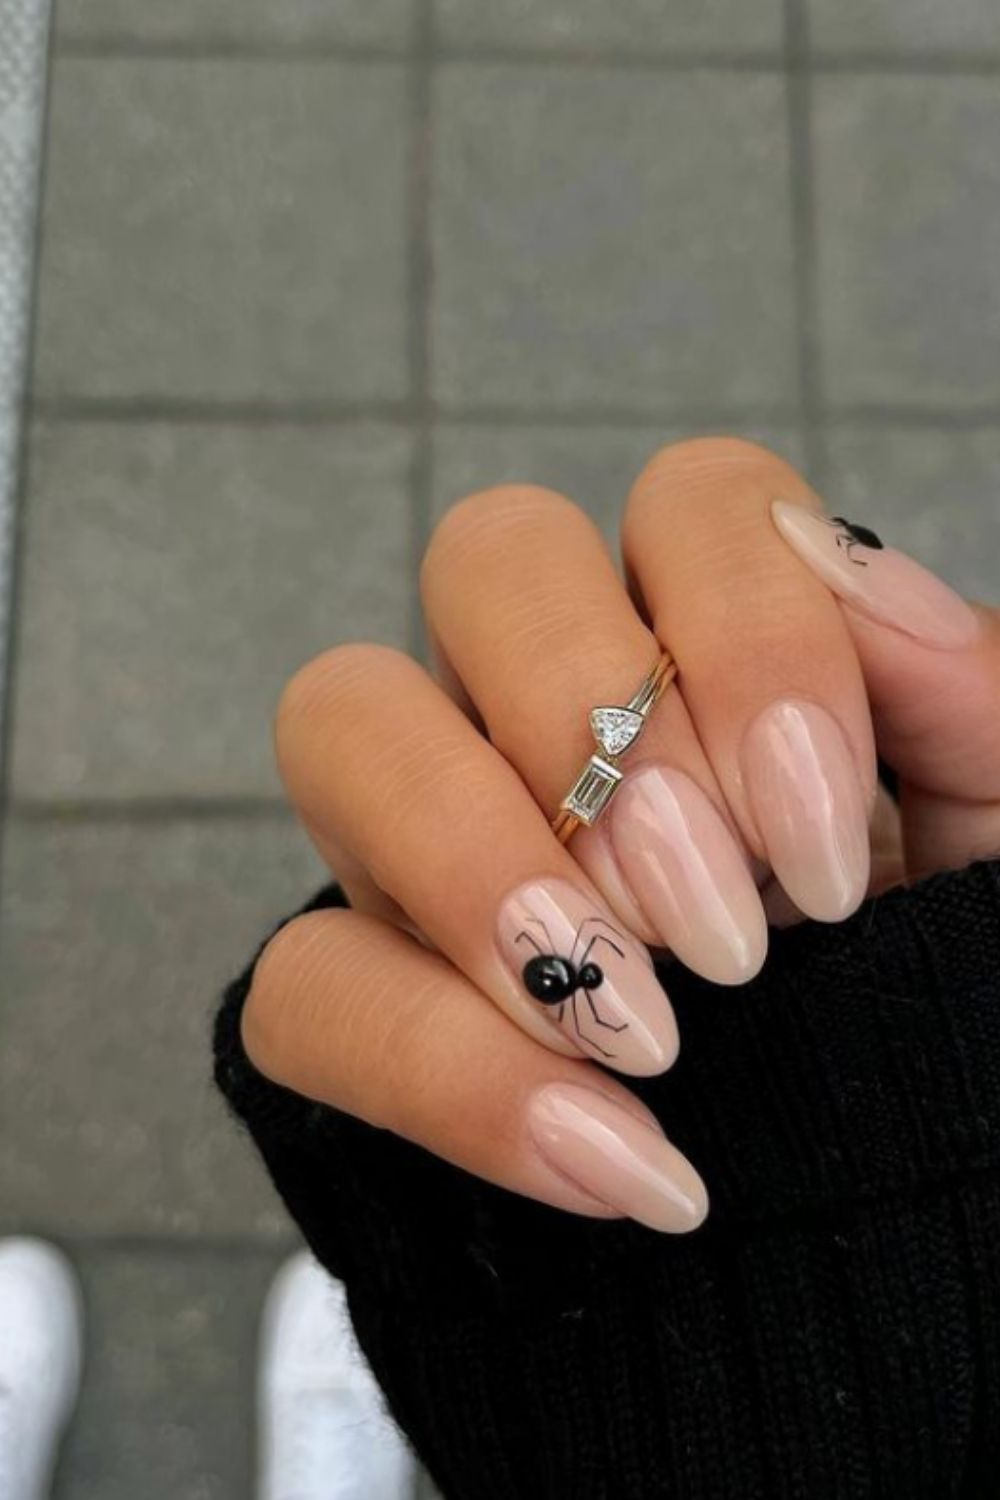 Almond nail design with spider